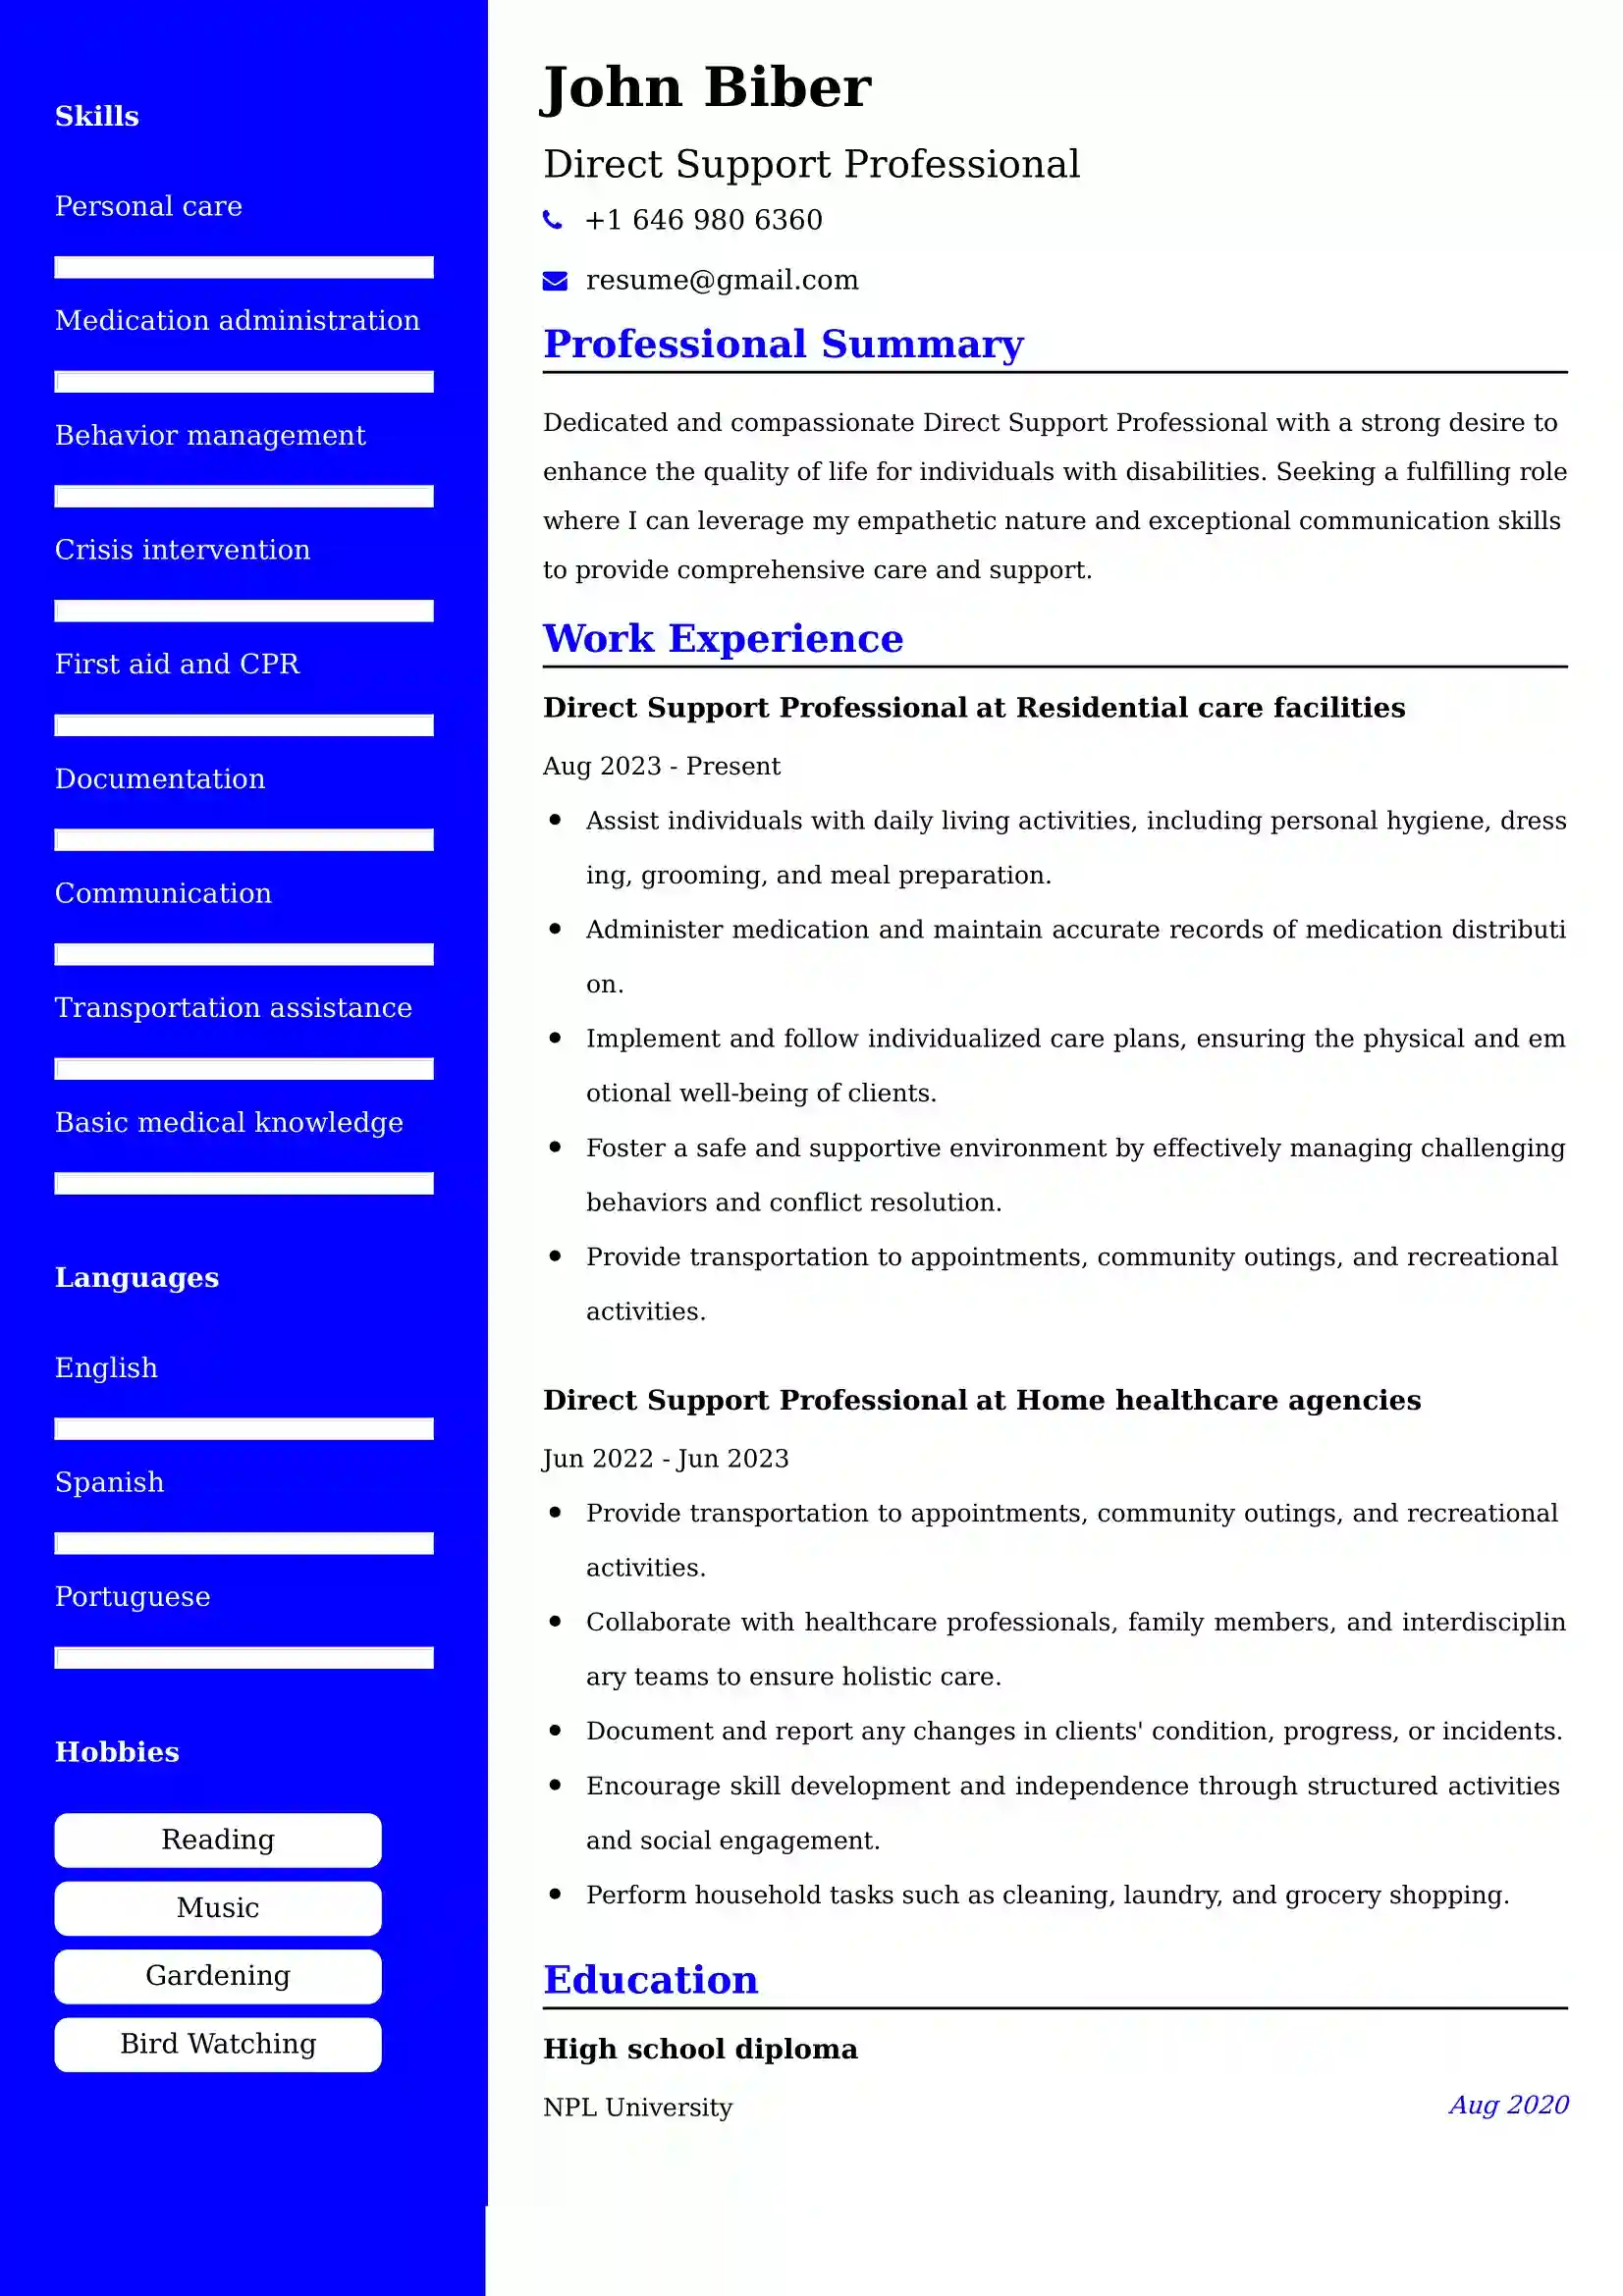 Direct Support Professional Resume Examples - UK Format, Latest Template.